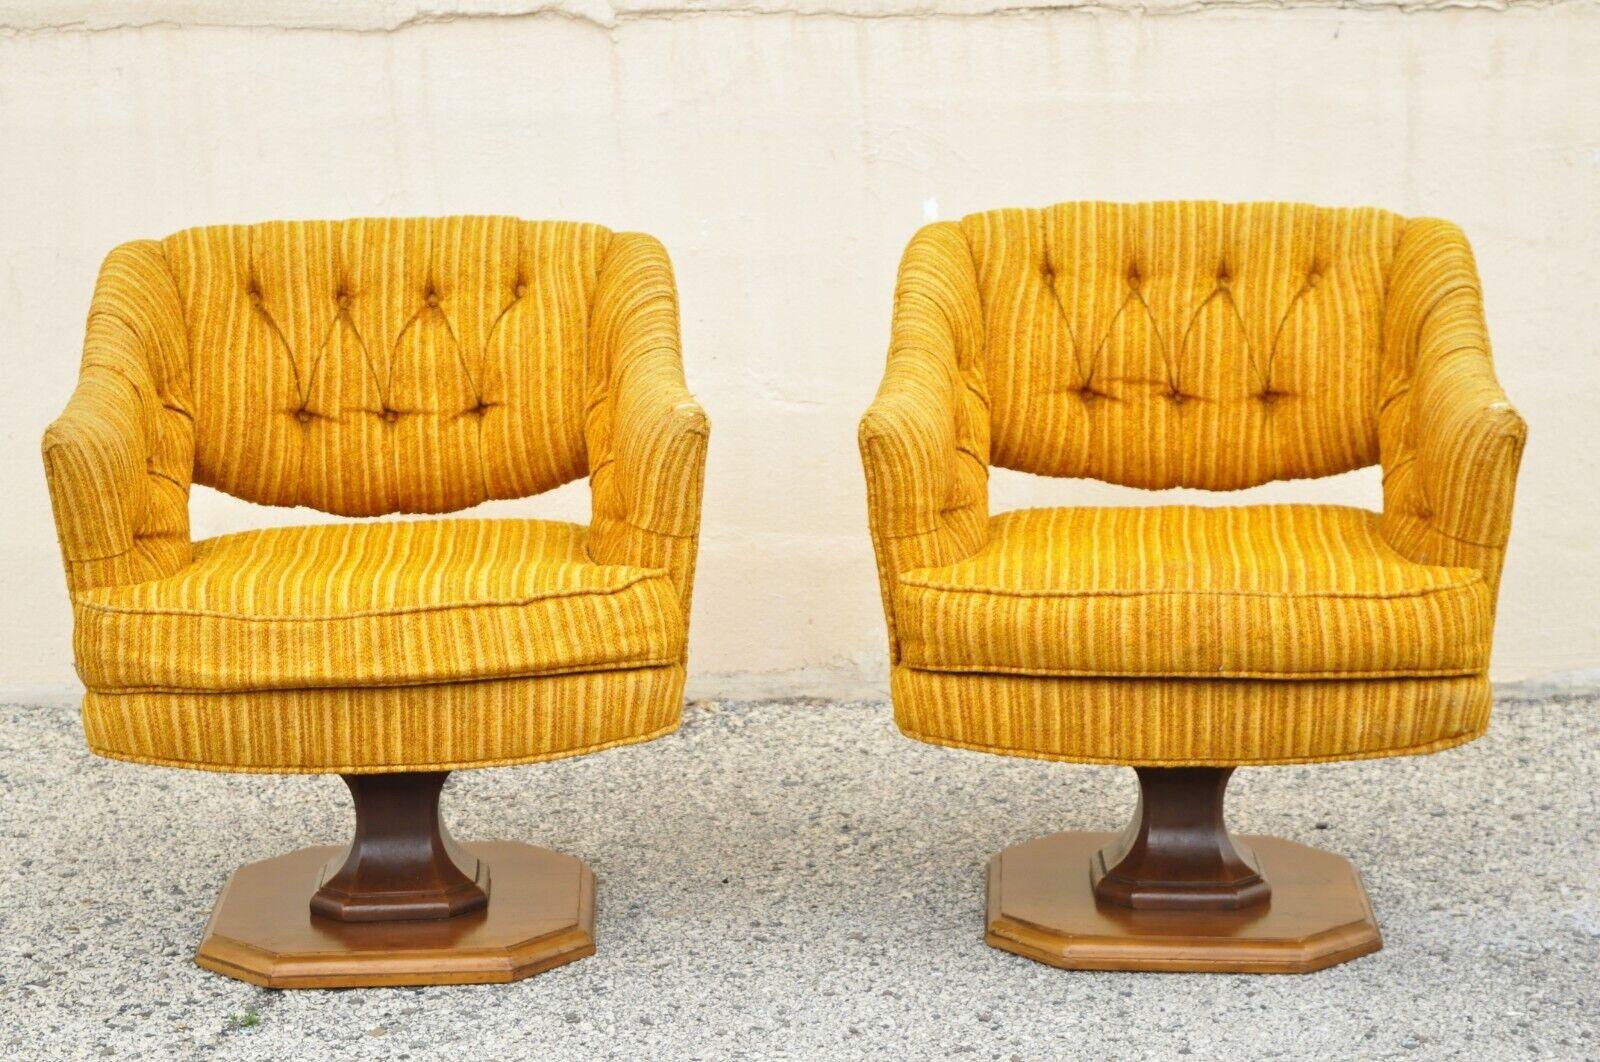 Silver Craft Orange Mid Century Modern Swivel Club Lounge Chairs - a Pair. Item features a swivel pedestal base, upholstered seats, very nice vintage pair, great style and form. Circa Mid 20th Century. Measurements: 29.5